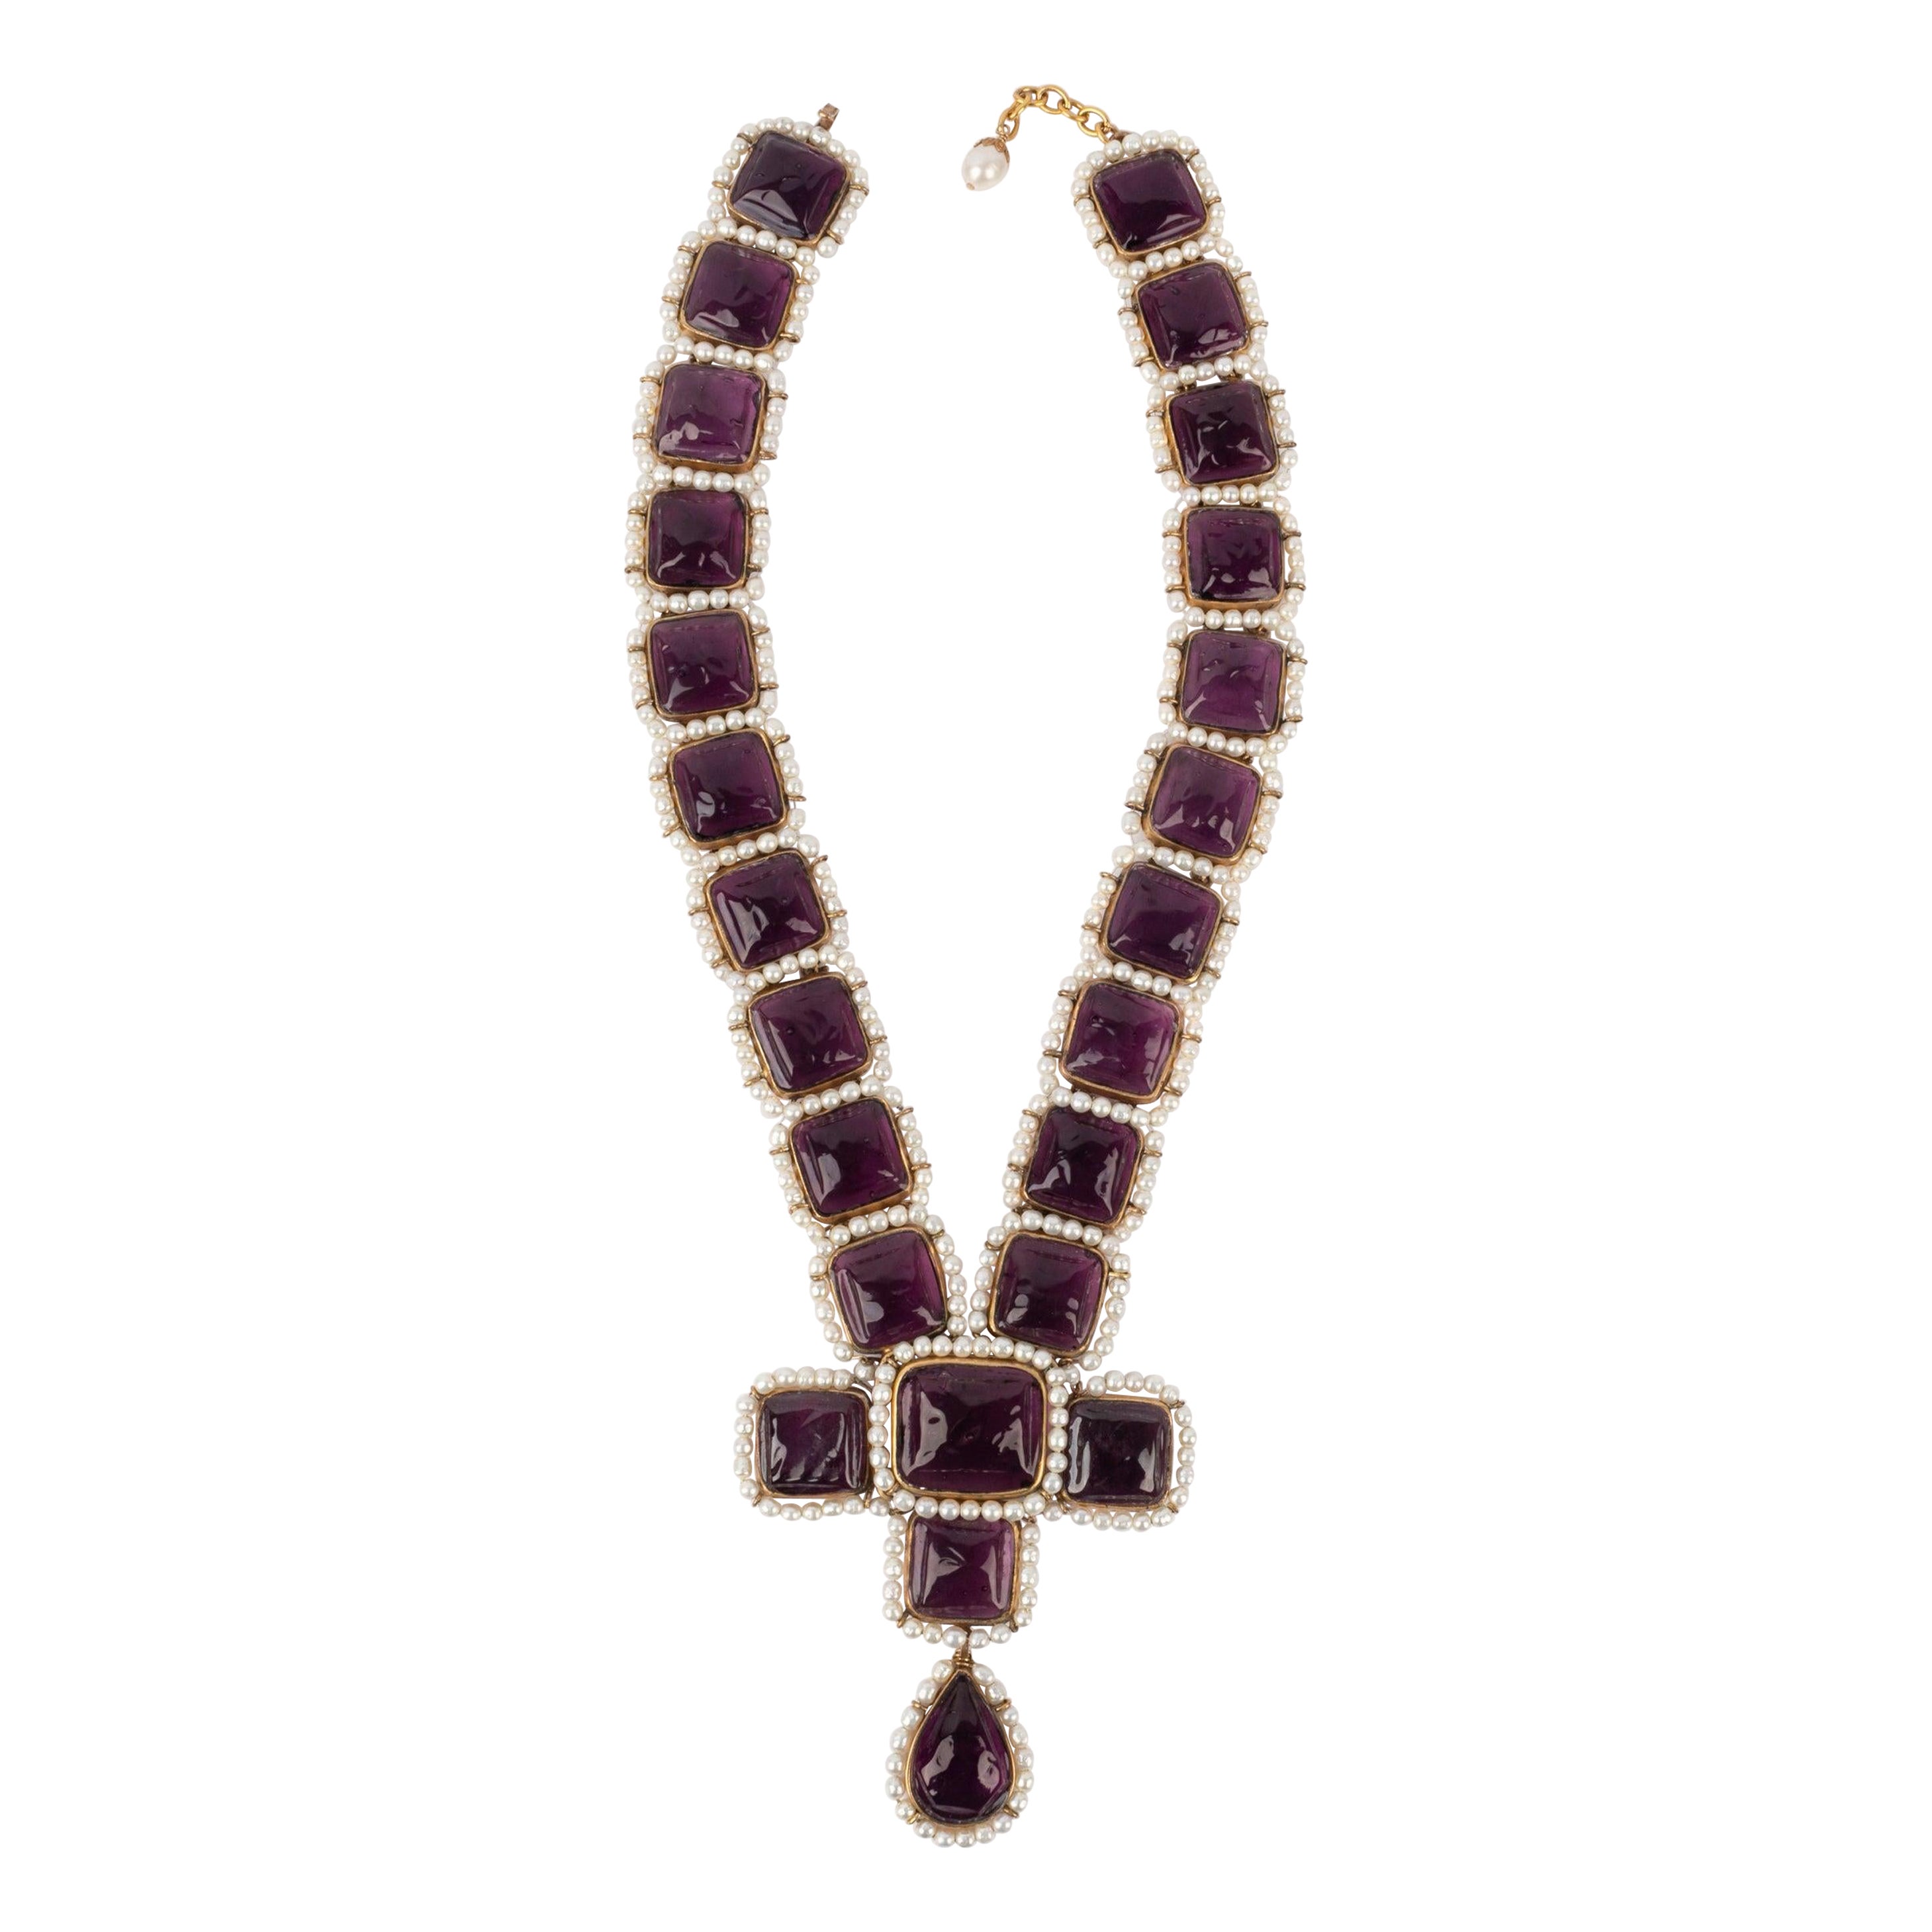 Chanel Golden Metal Cross Necklace with Glass Paste and Costume Pearls, 1930s